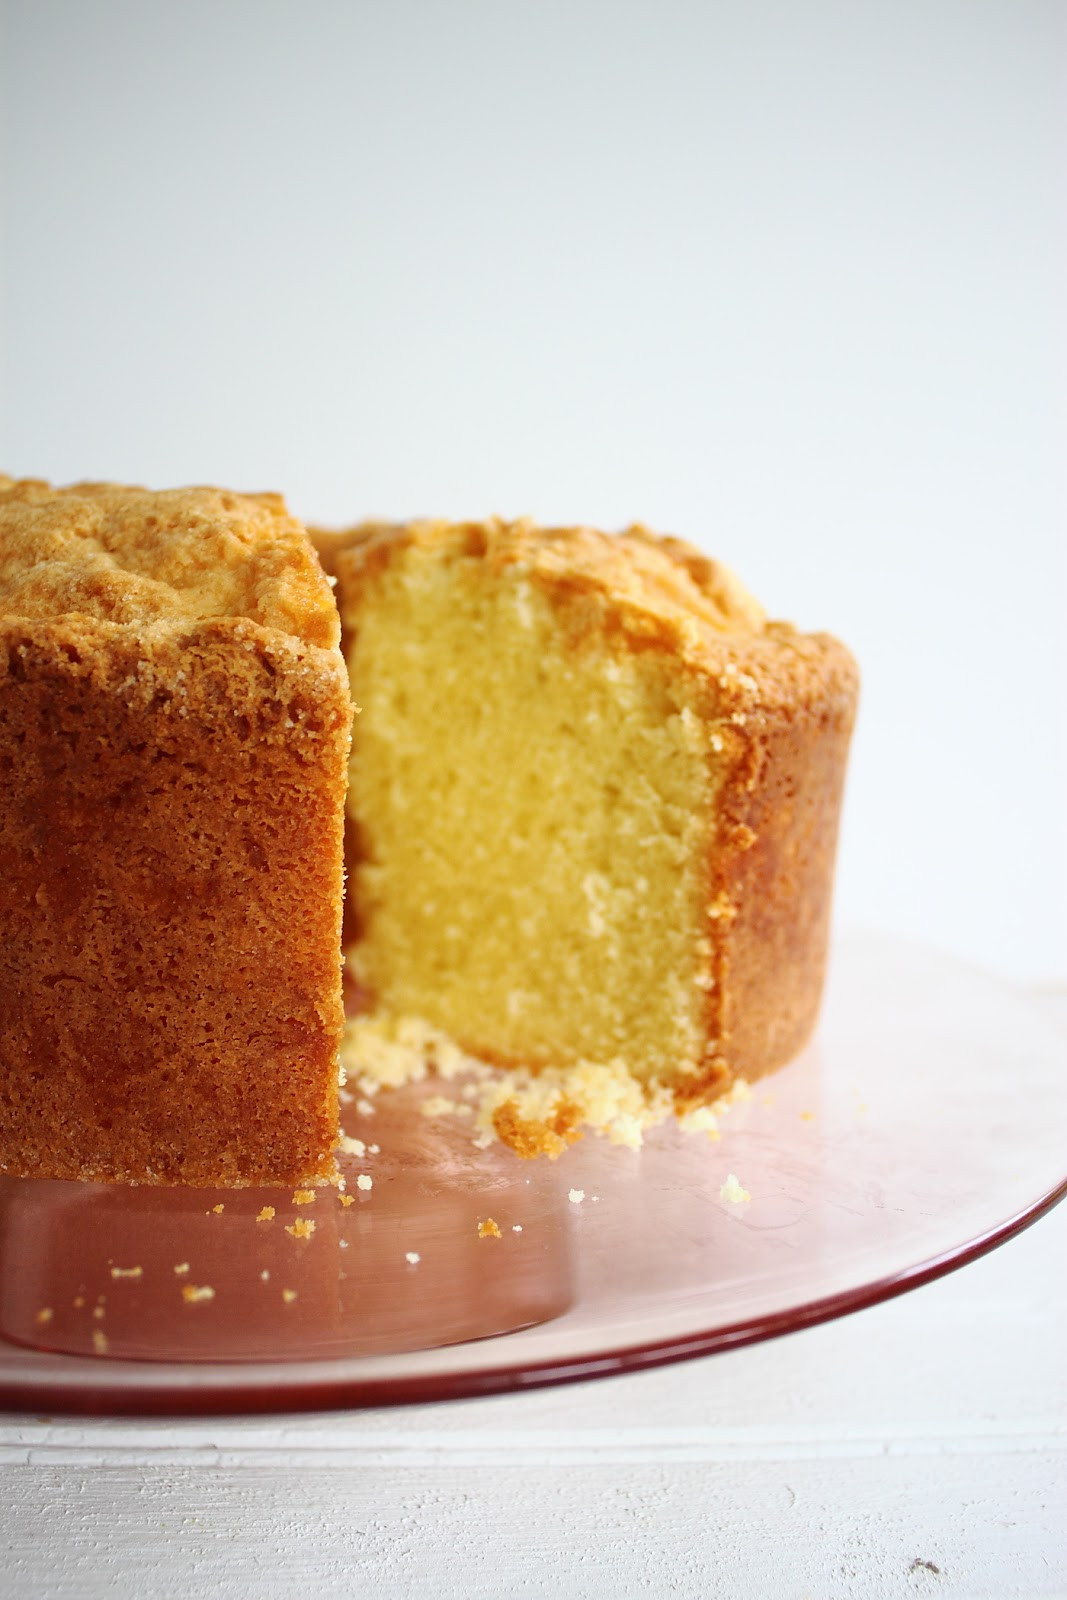 Lemon Sour Cream Pound Cake Southern Living
 Confections from the Cody Kitchen Sour Cream Pound Cake